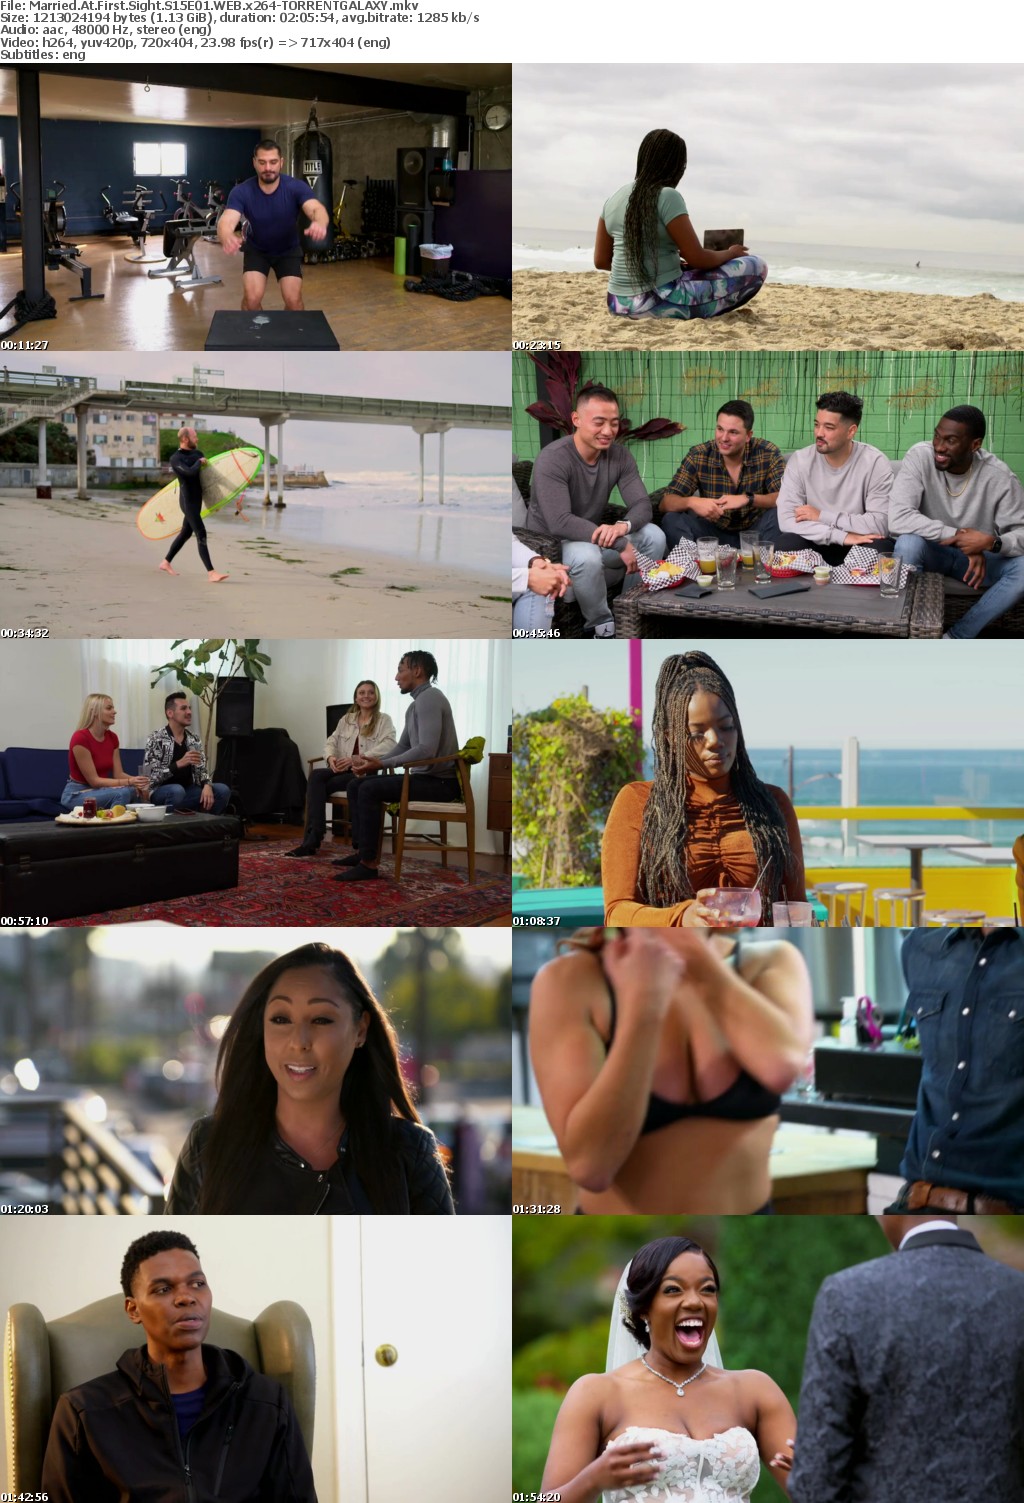 Married At First Sight S15E01 WEB x264-GALAXY